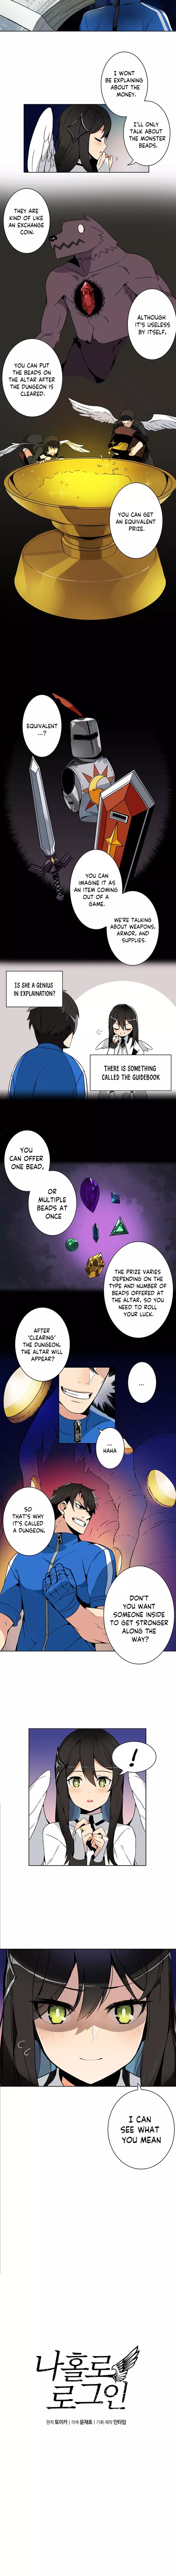 Solo Login - 3 page 7